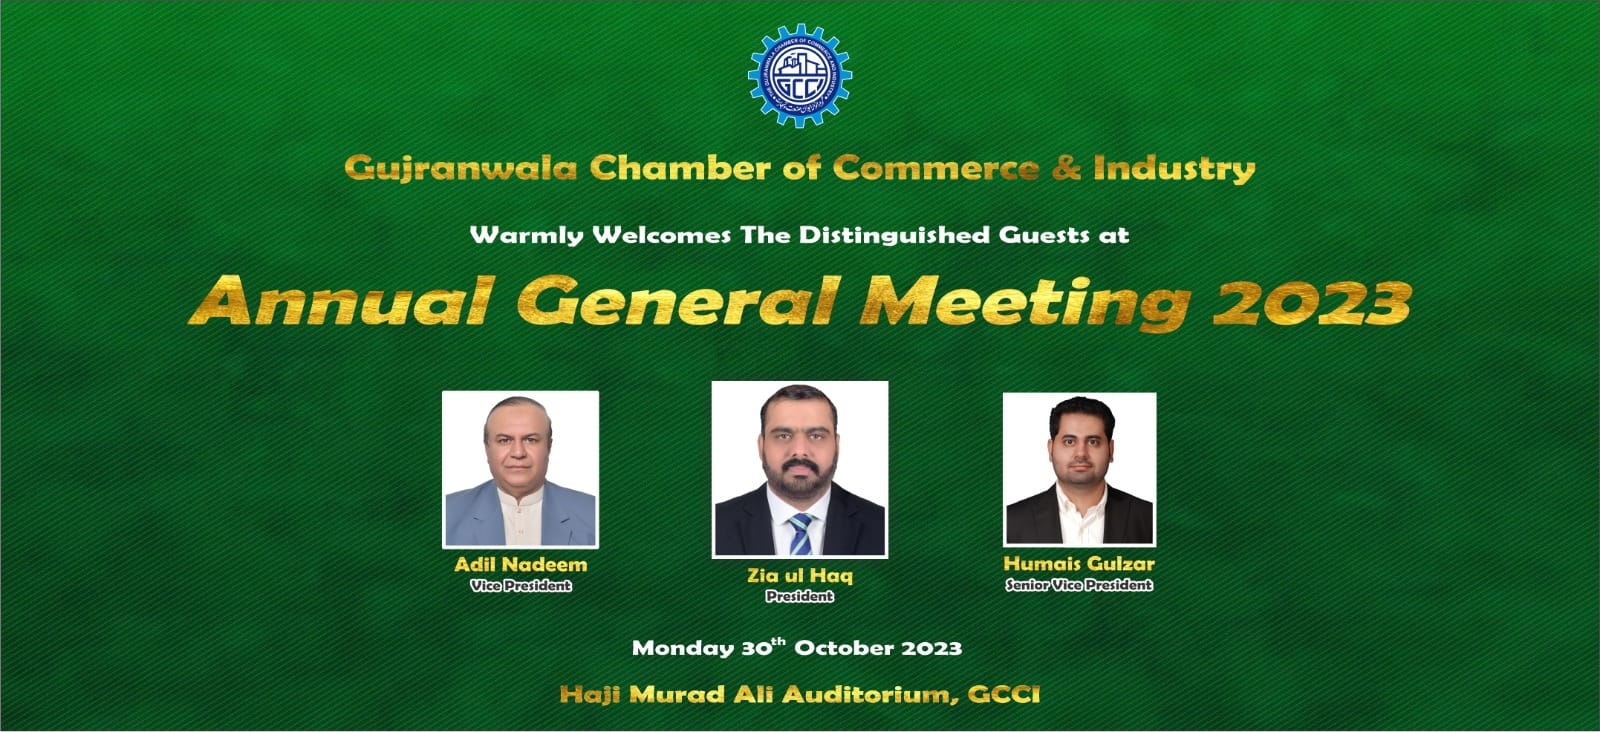 Gujranwala Chamber's Annual General Meeting 2023.